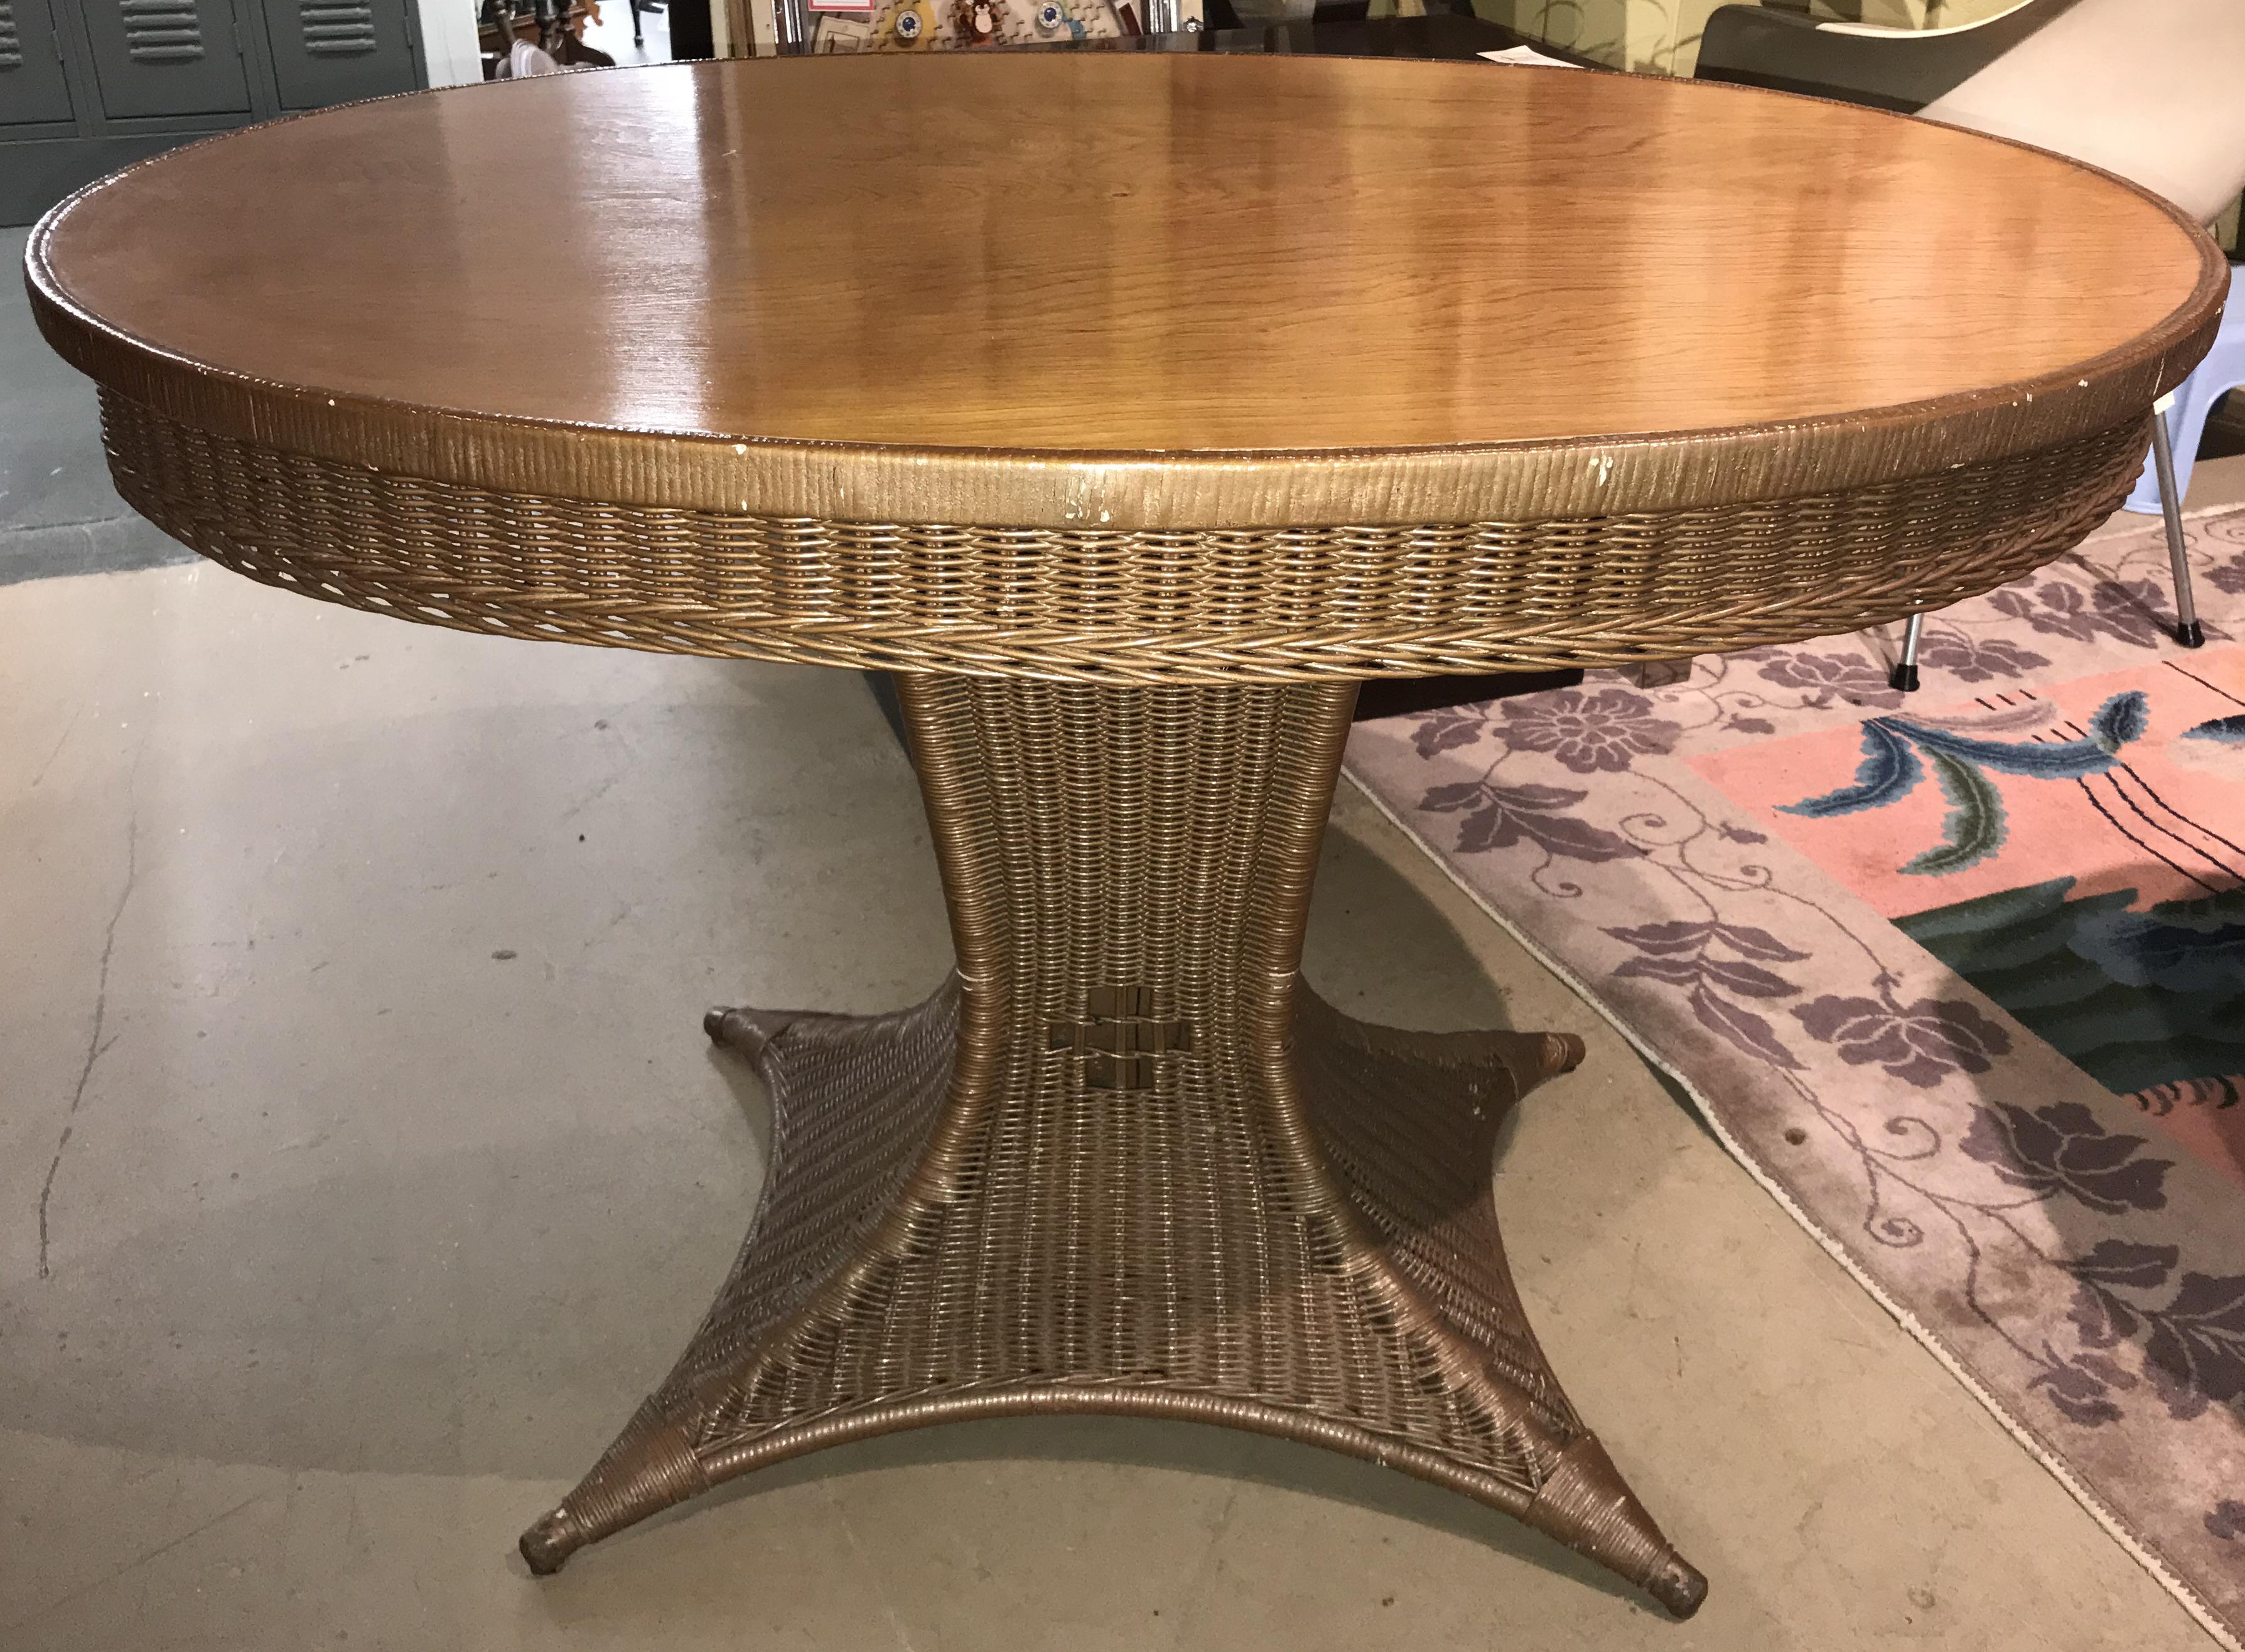 A fine oval wicker table with plank wood top on a square central tapering pedestal base which flares out to four supporting footed corners. A Paine Furniture Co, Boston MA metal tag is attached to the base. Paine Furniture Co was founded in Boston